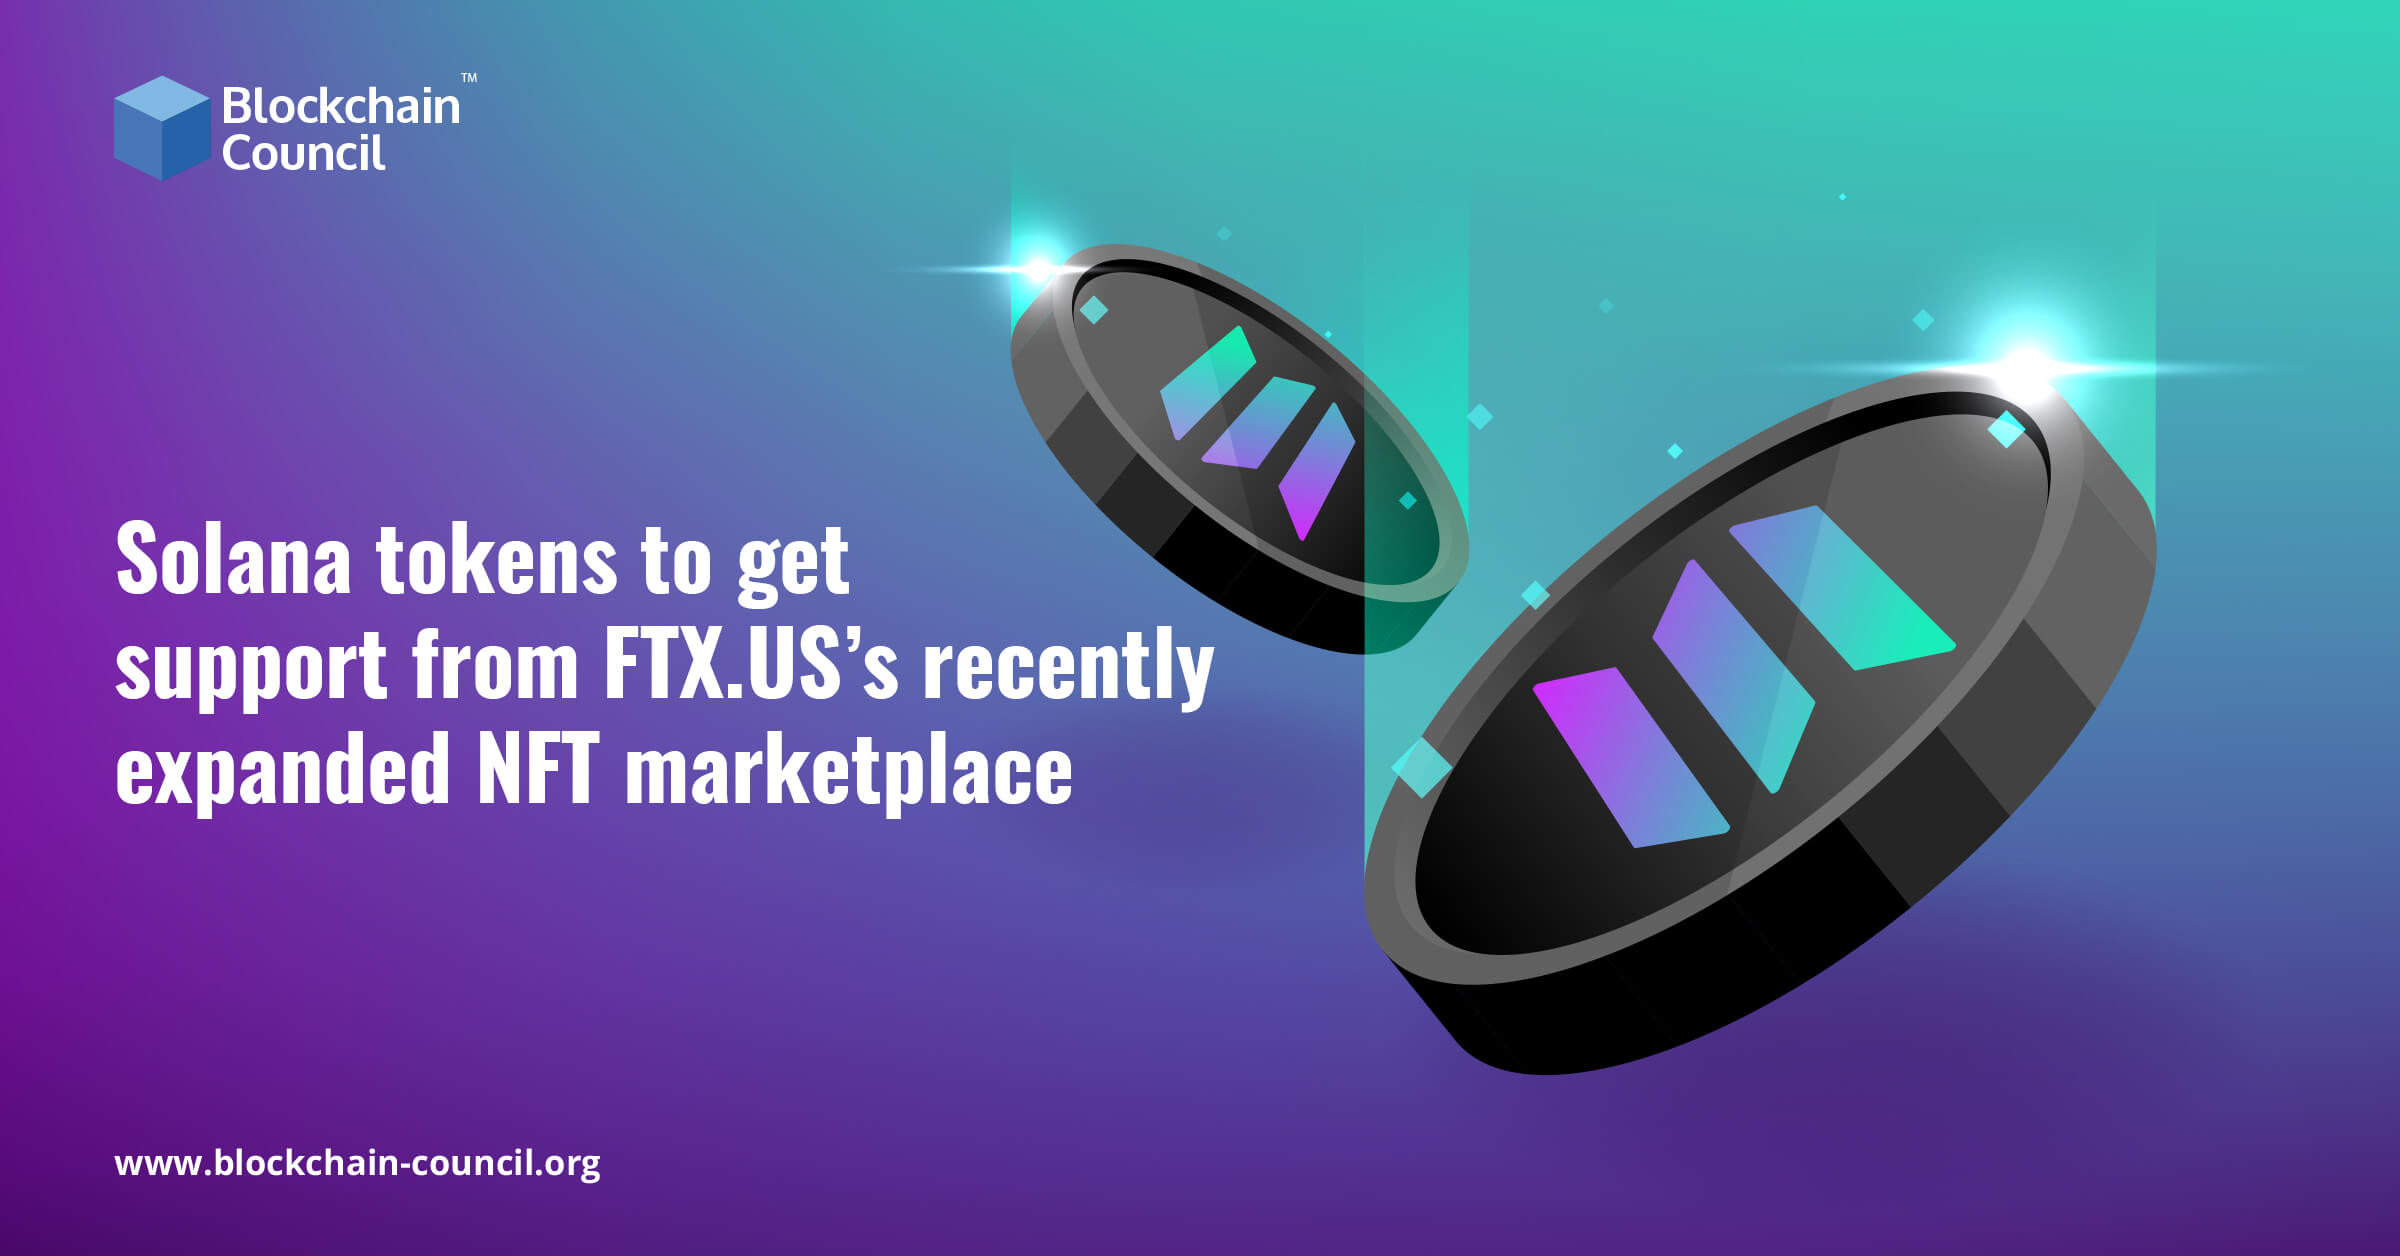 Solana tokens to get support from FTX.US’s recently expanded NFT marketplace